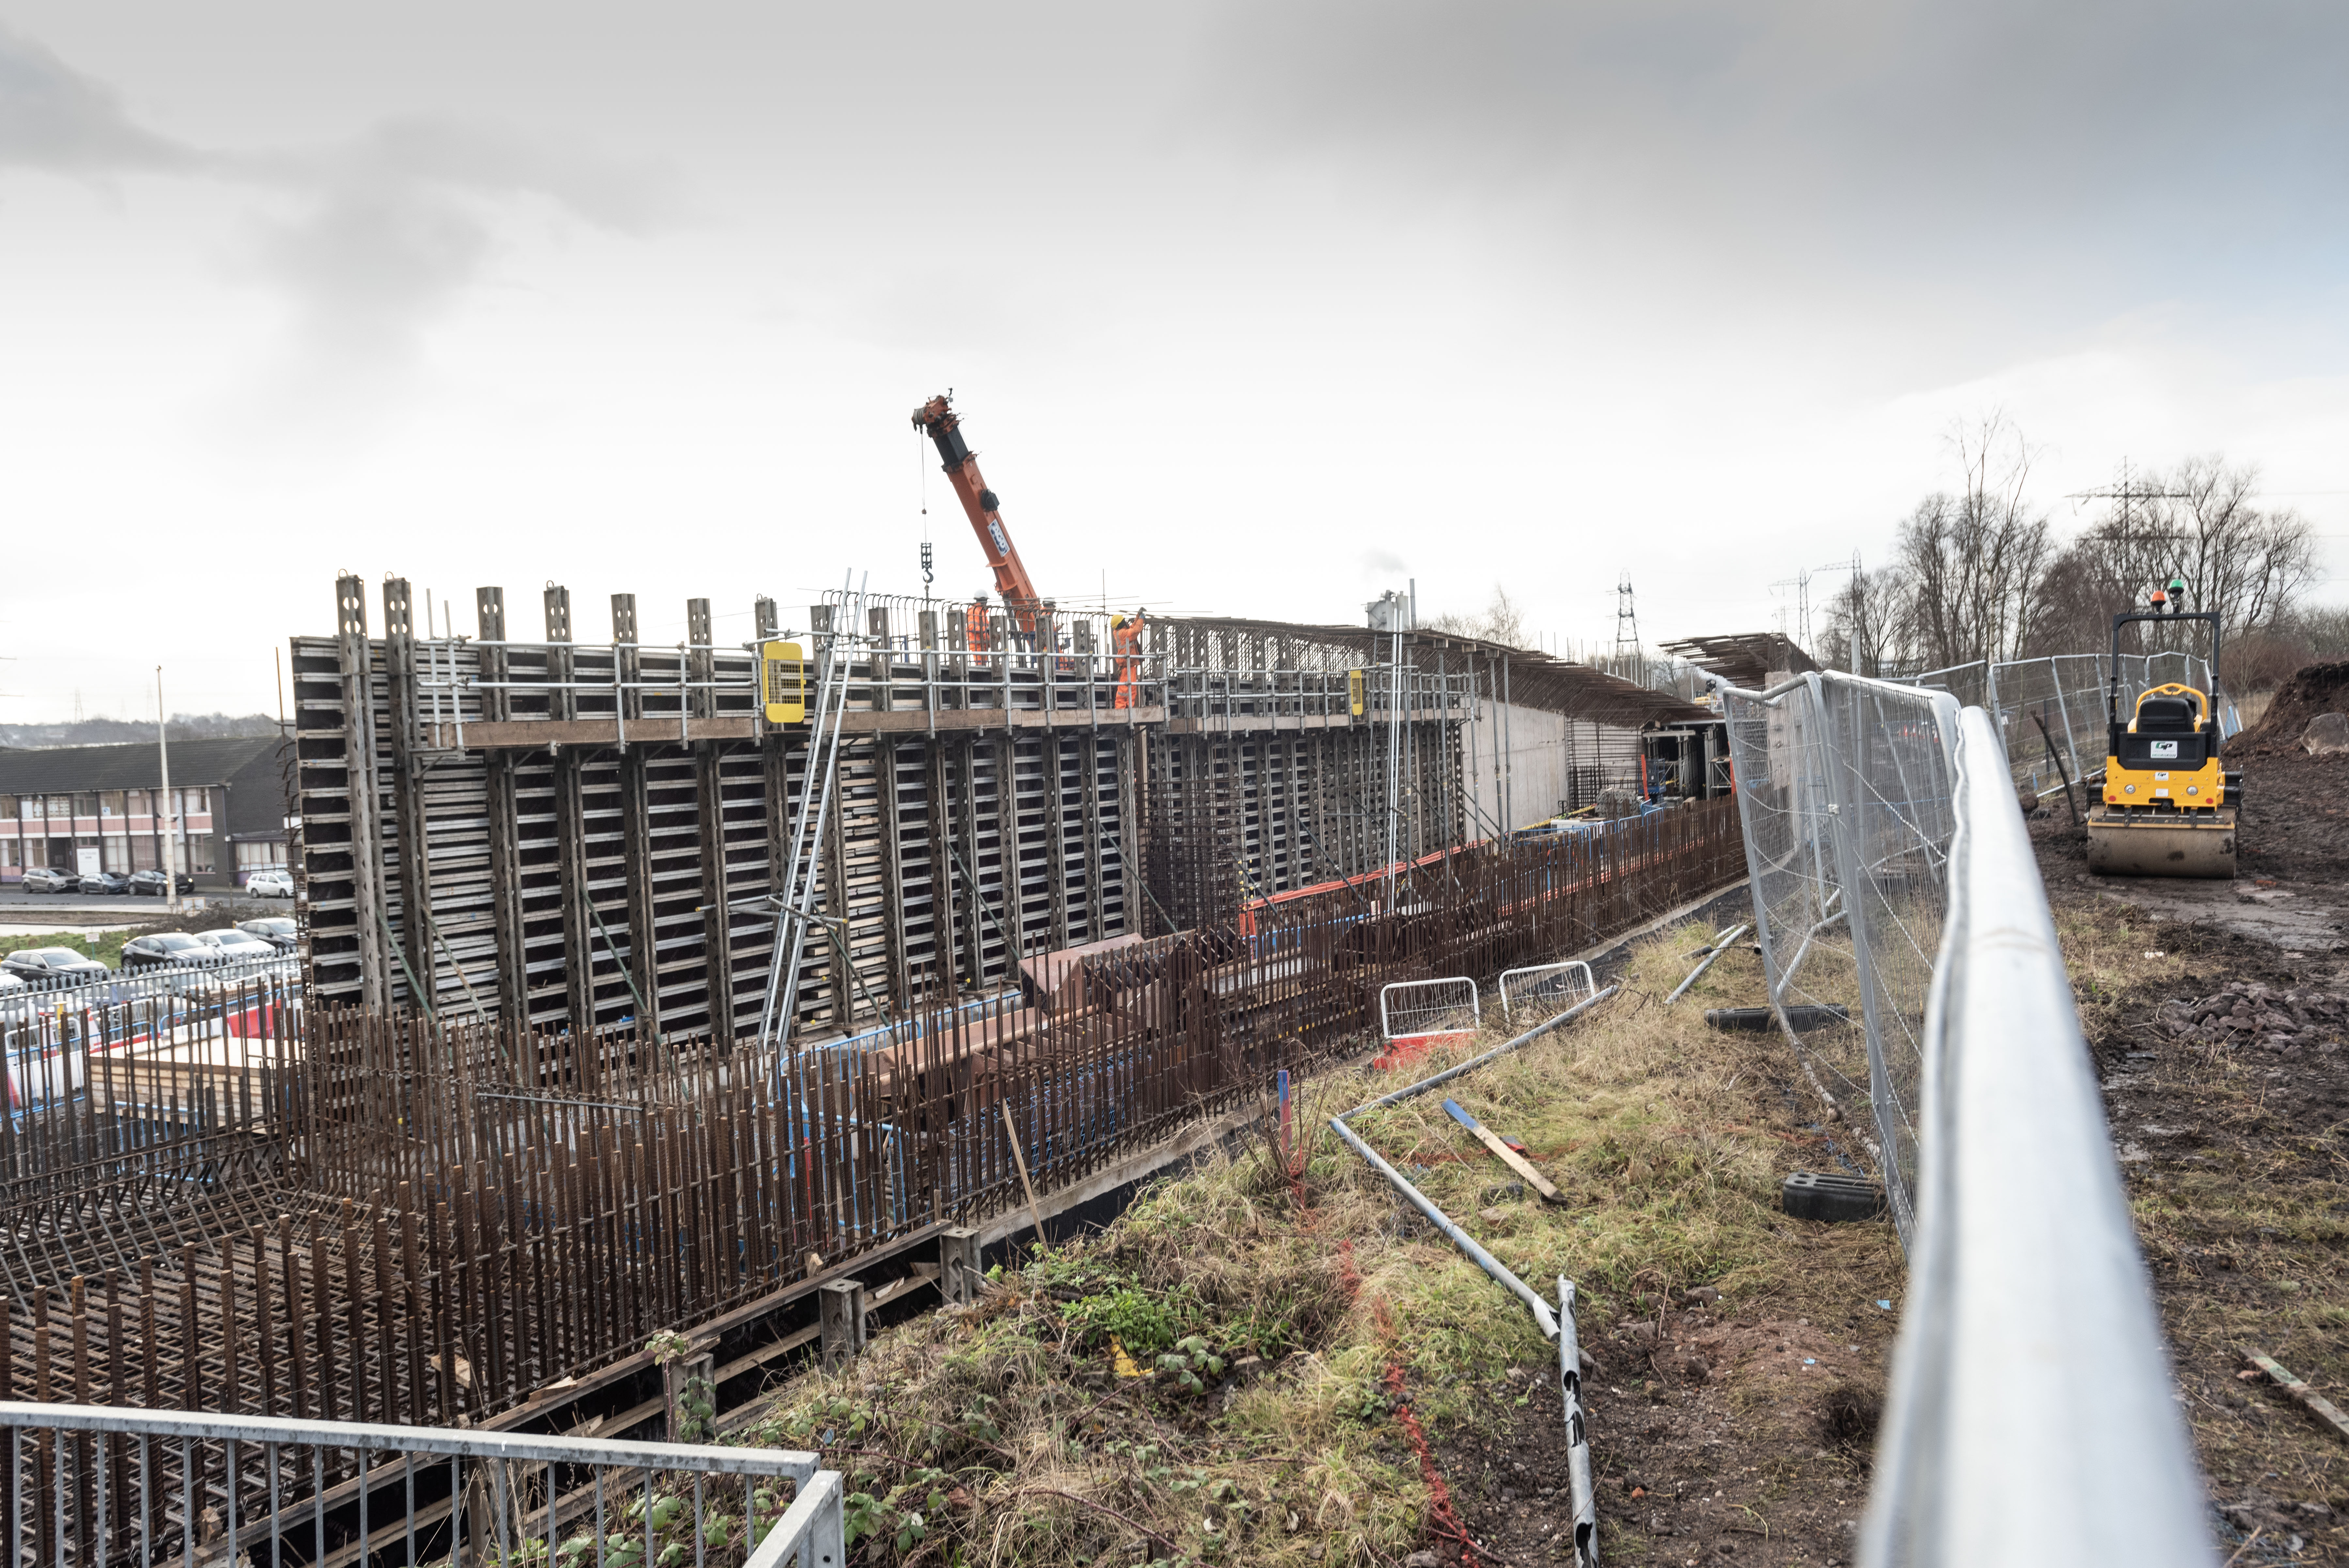 Embankment being built for the new Metro extension from Wednesbury to Brierley Hill